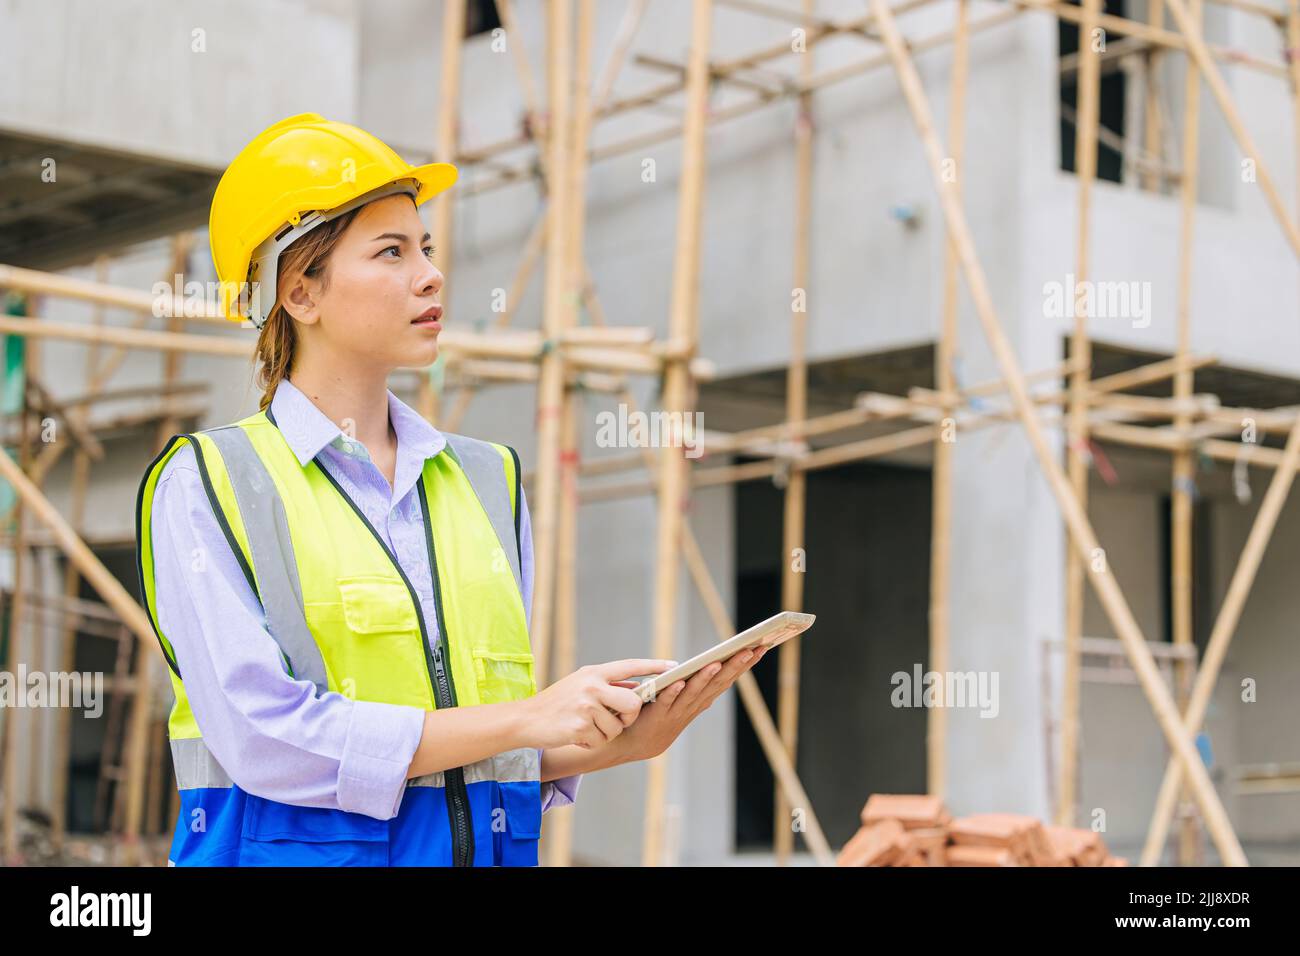 Engineer Construction Builder woman worker confident smart working in construction looking home build project. Stock Photo